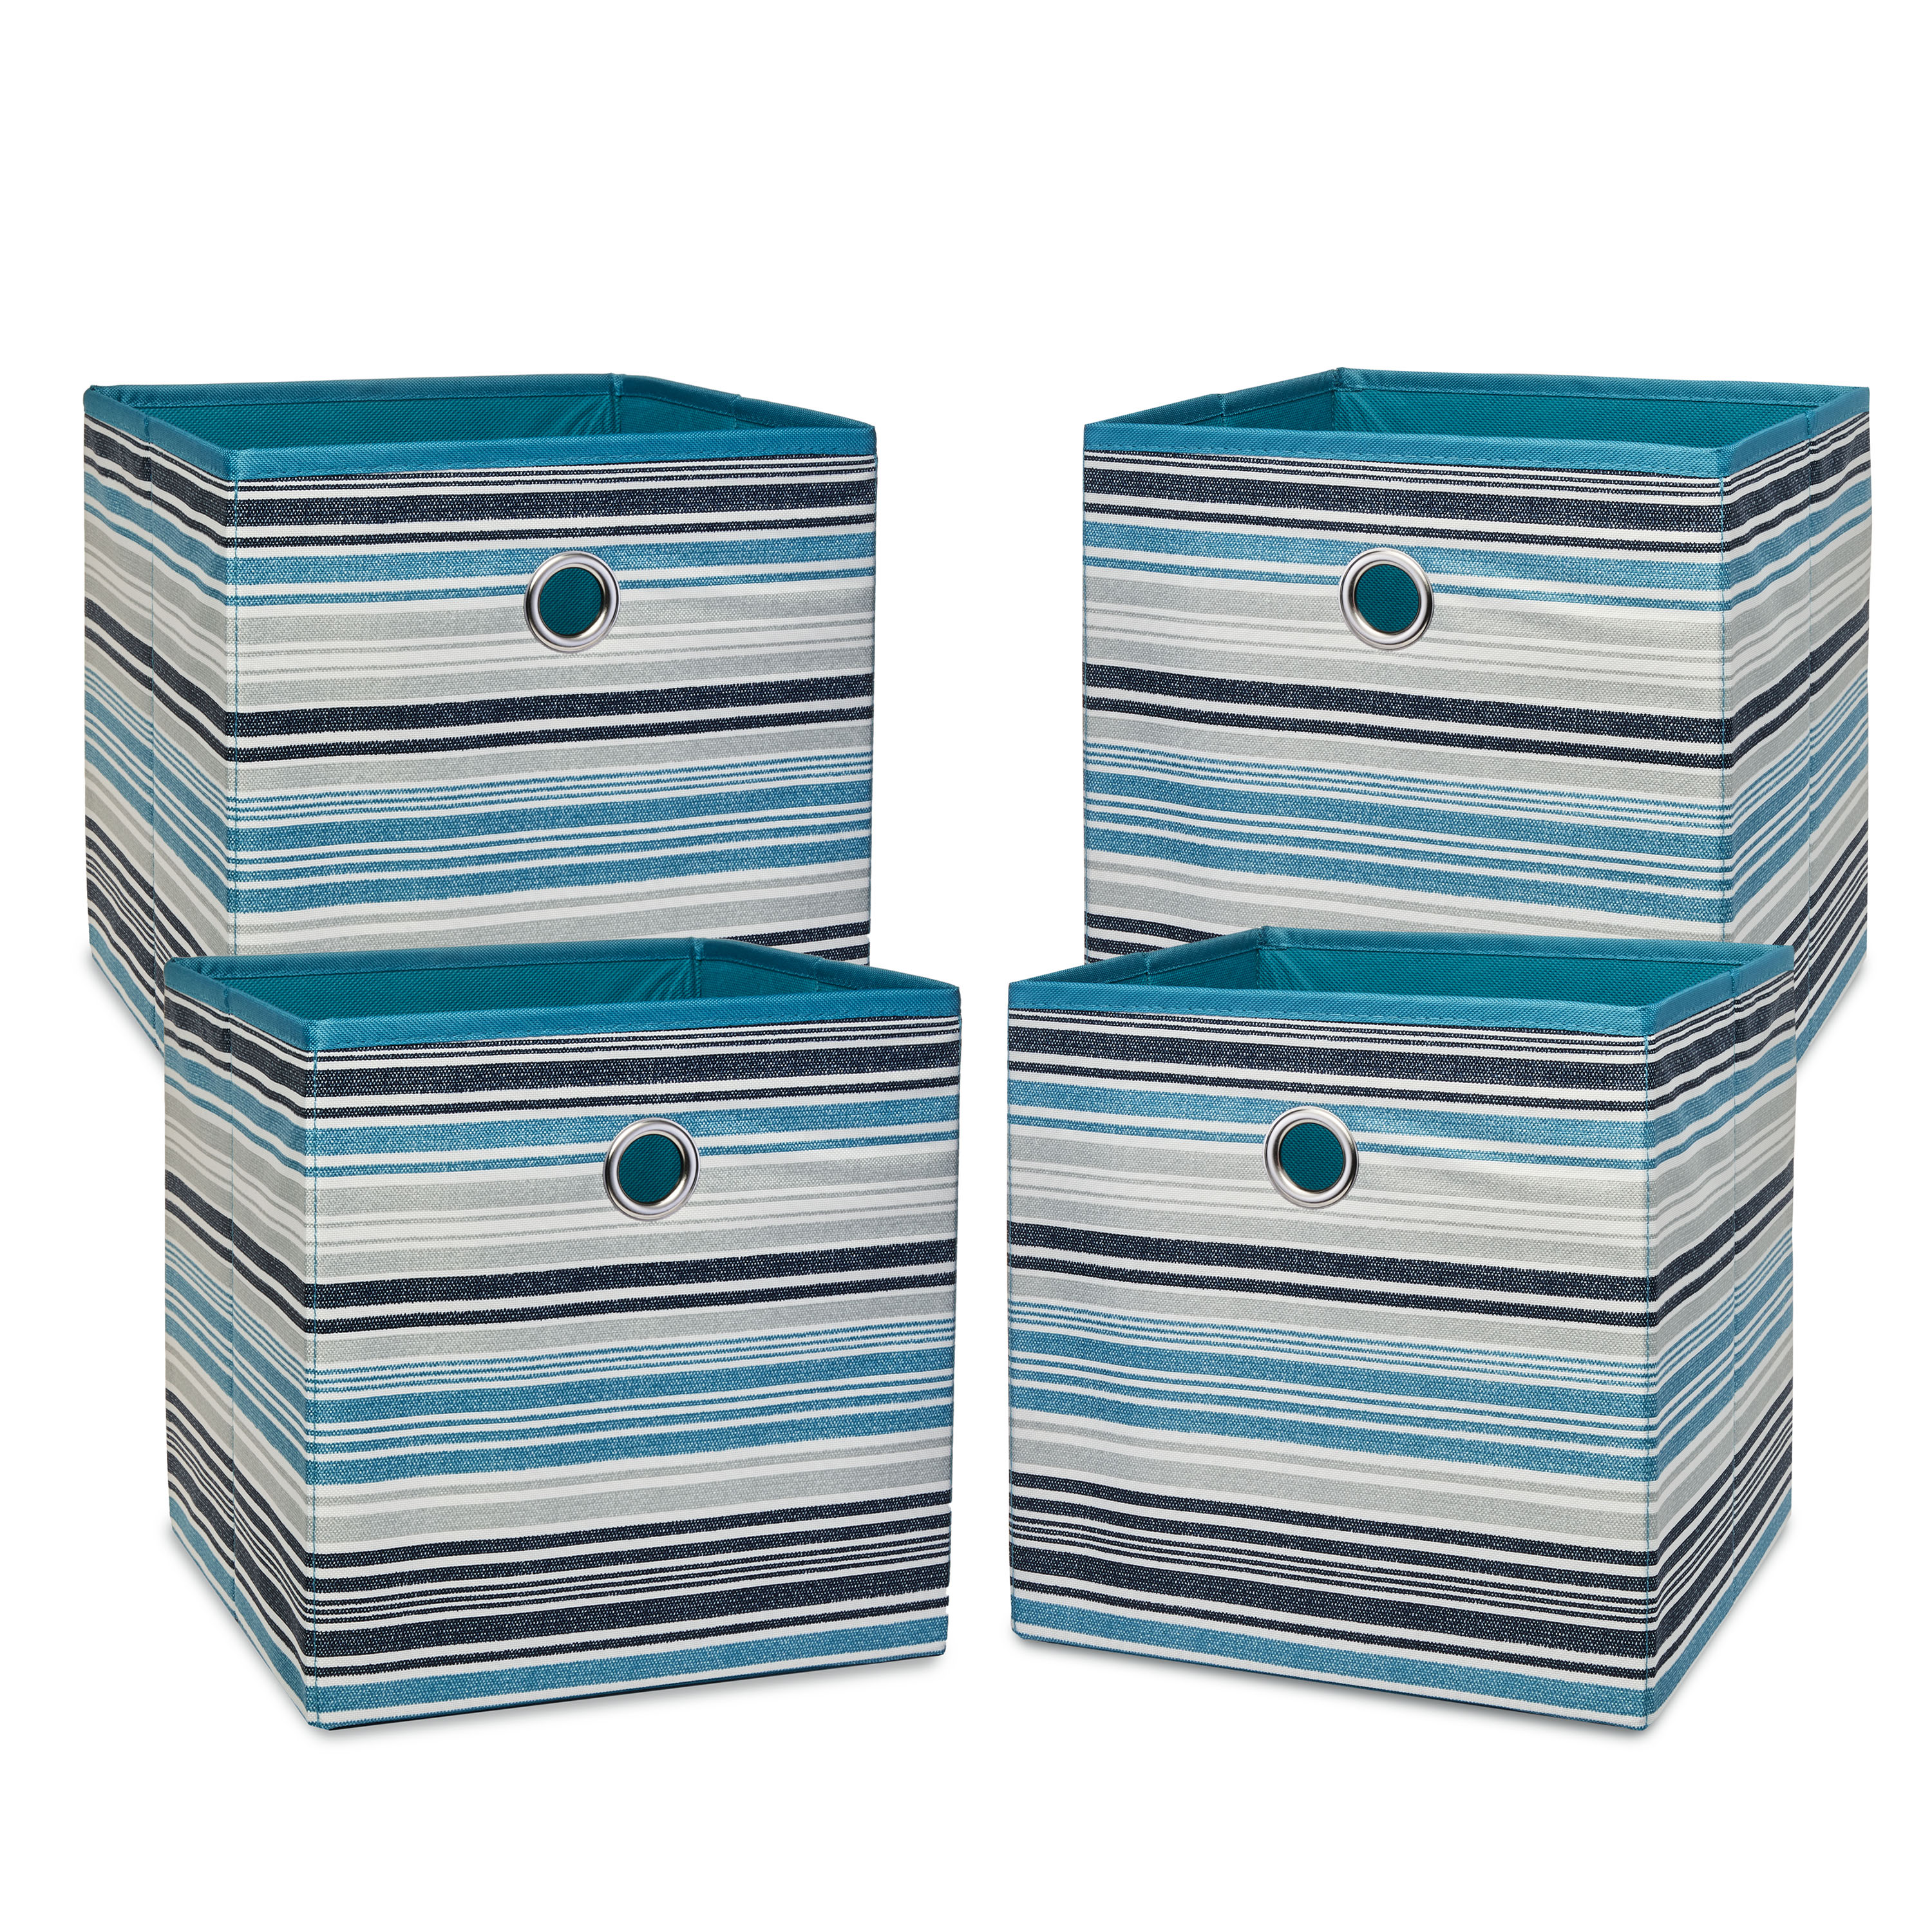 Mainstays Collapsible Fabric Cube Storage Bins (10.5" x 10.5"), Striped Cool Water, 4 Pack - image 3 of 5